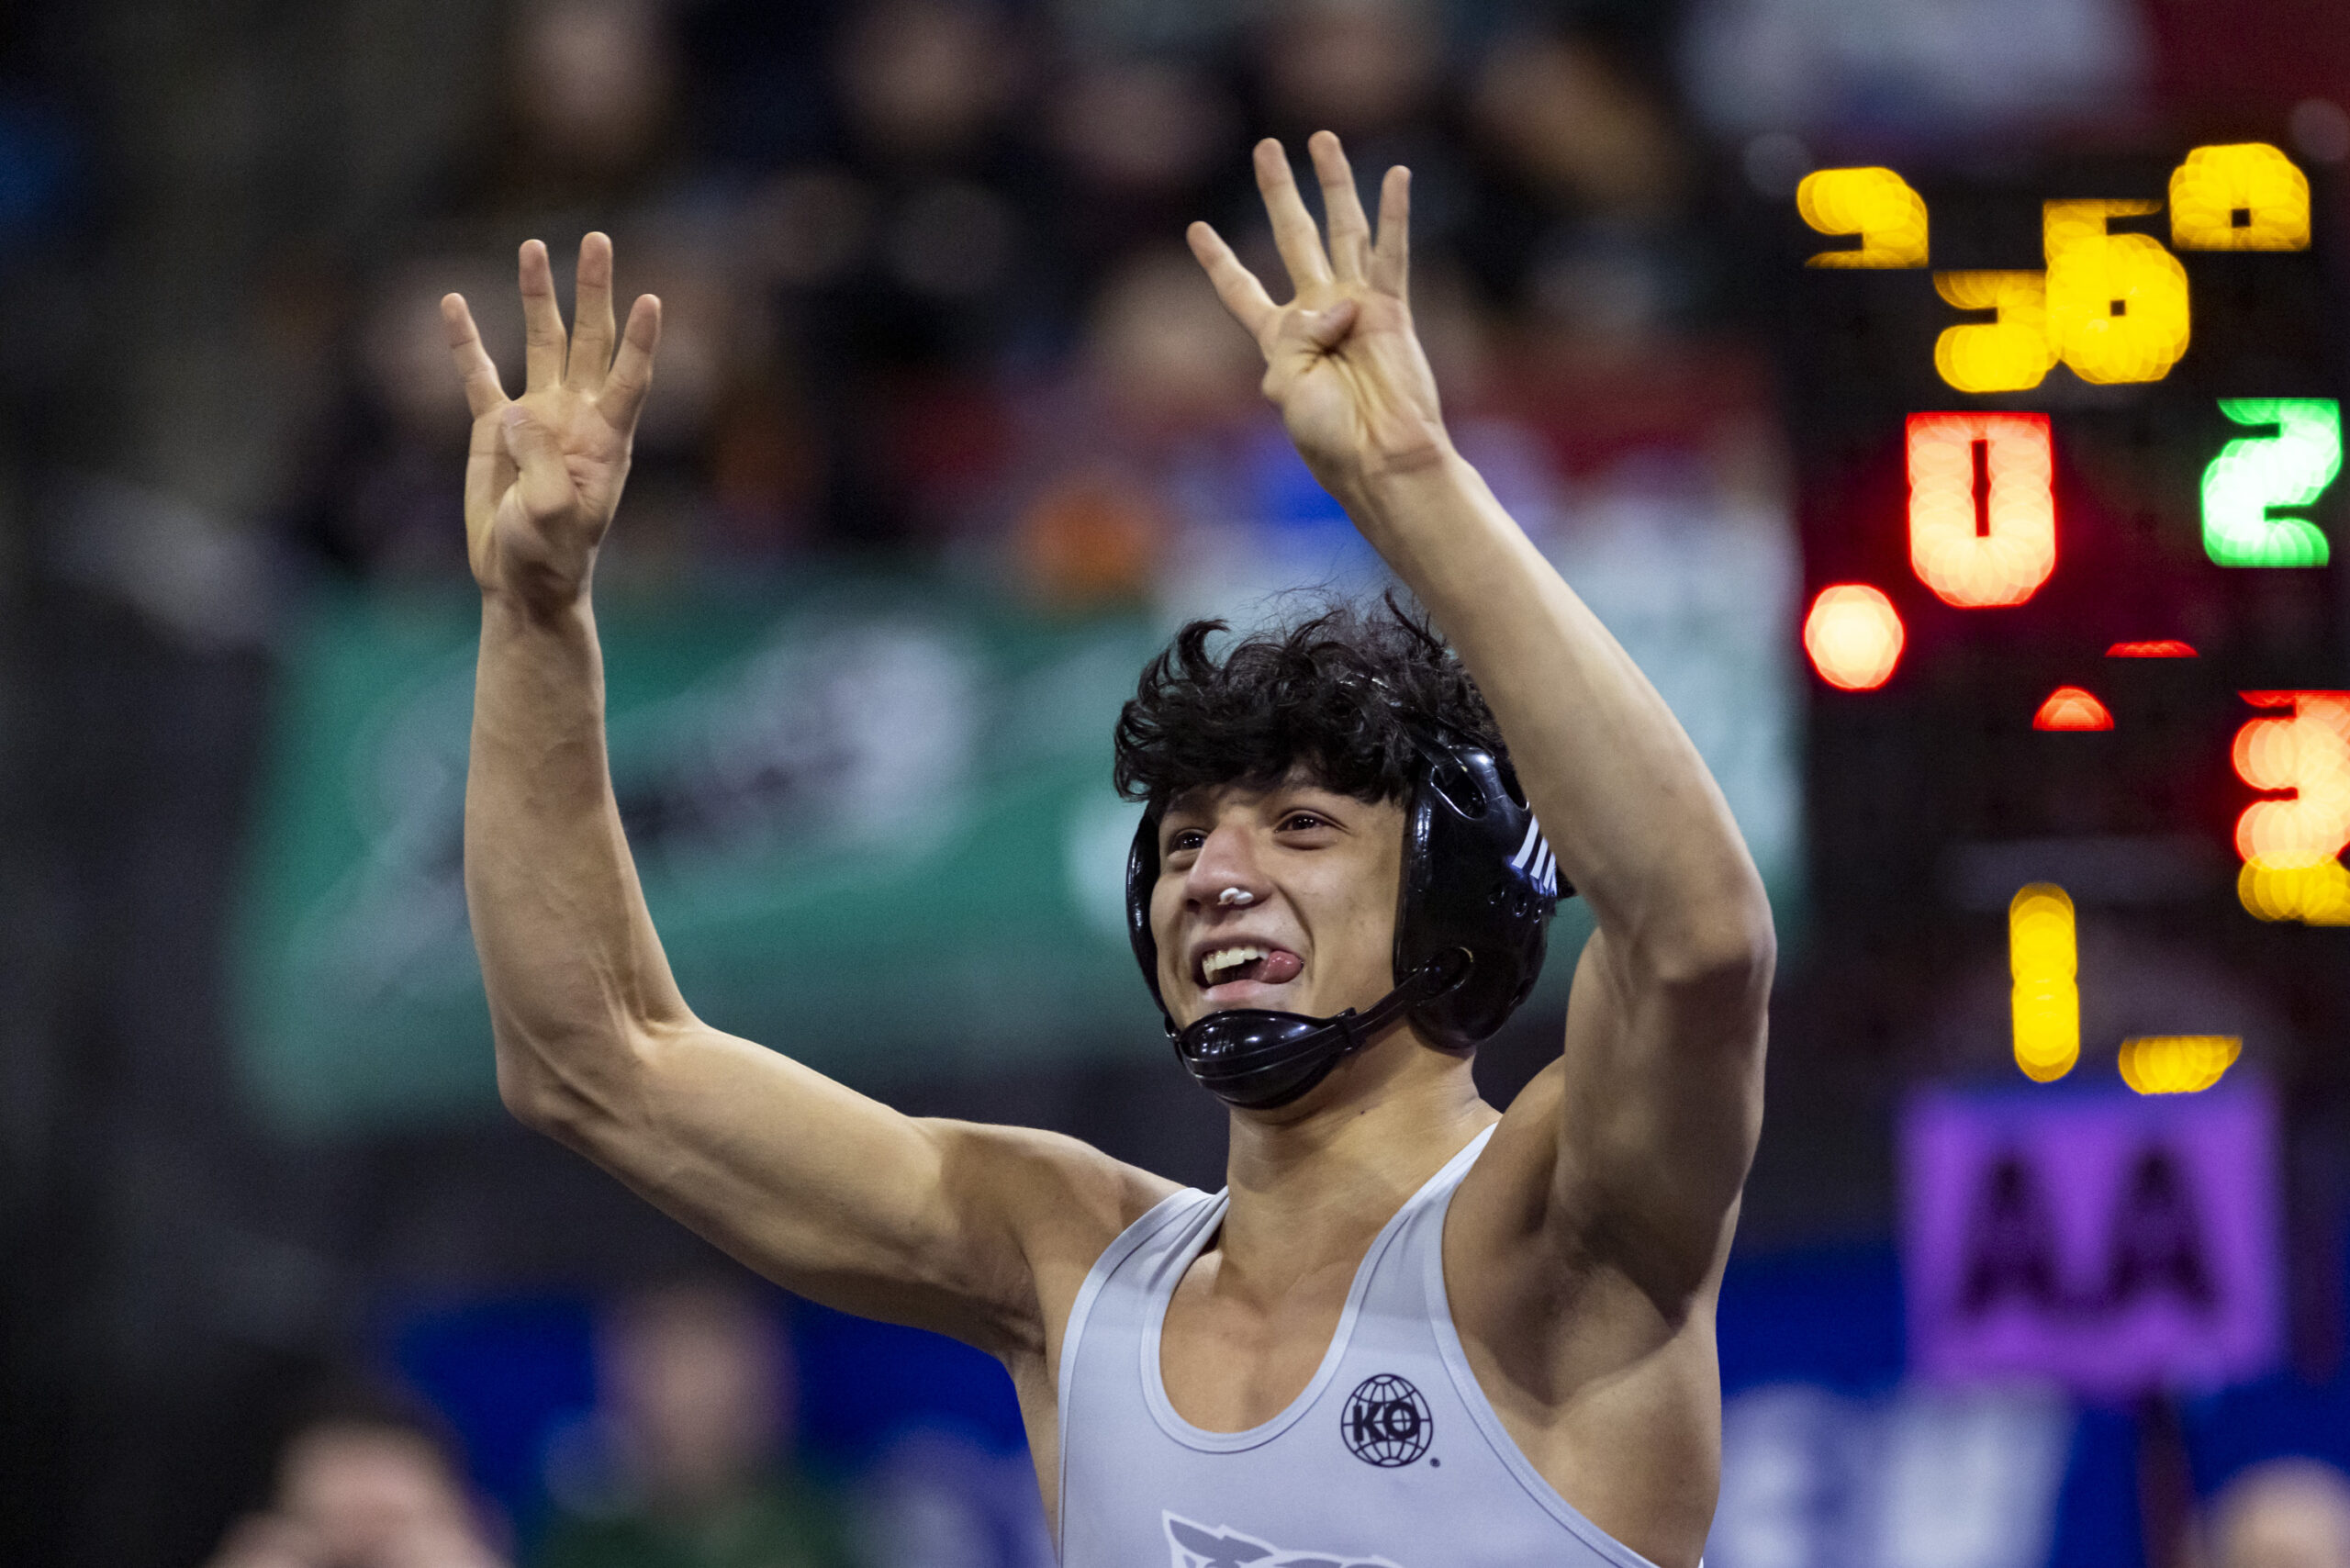 A profile shot of a wrestler from Glacier High School holding both hands above his head with four fingers outstretched, indicating his fourth state title.